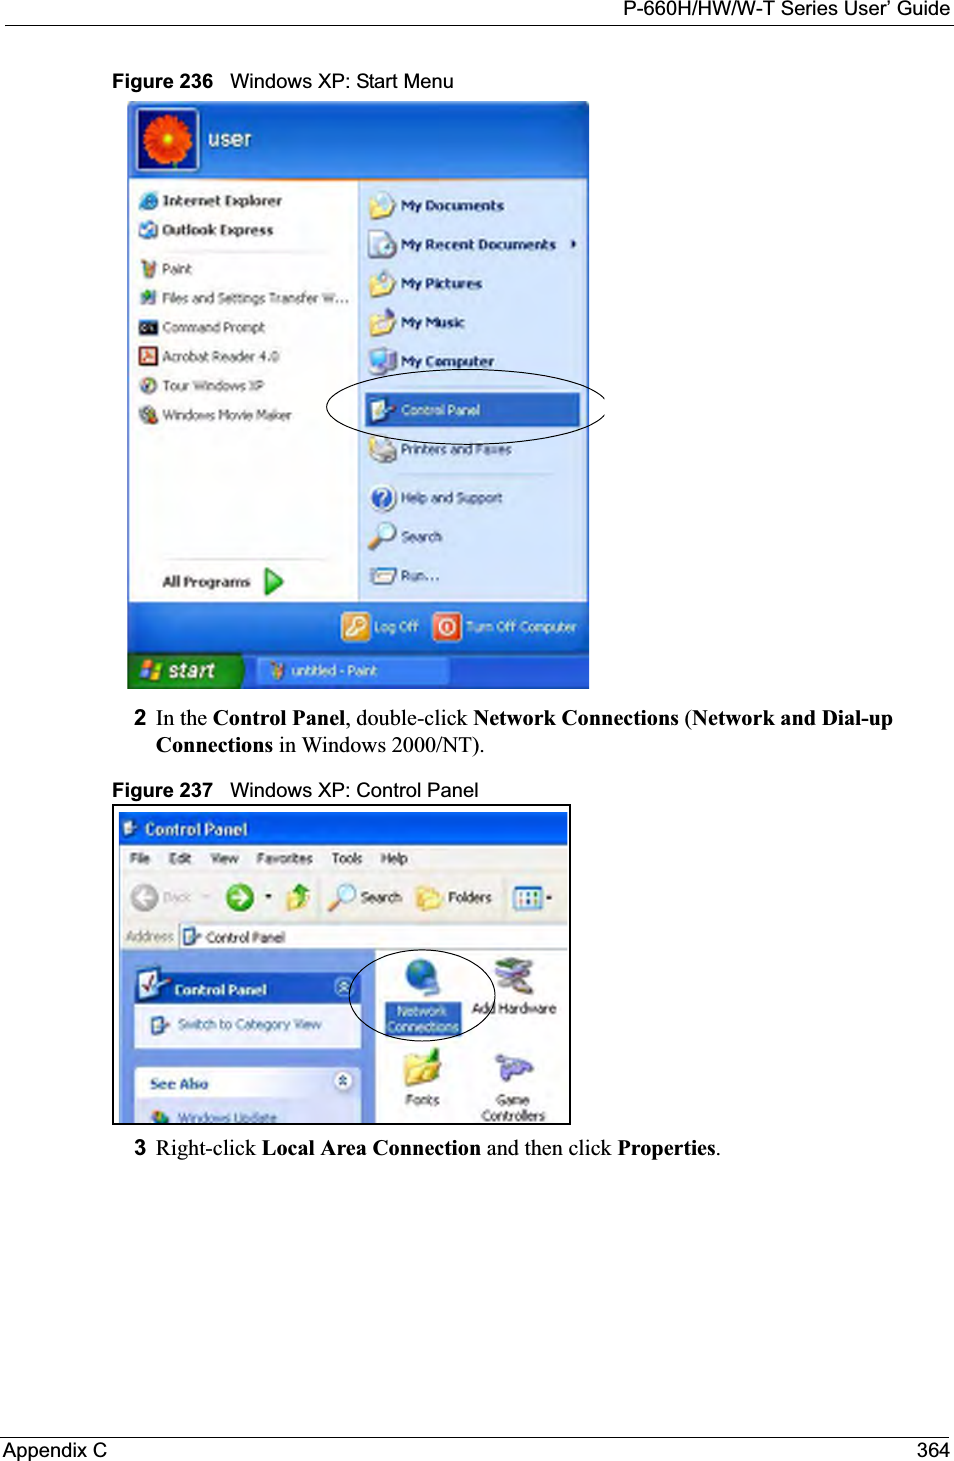 P-660H/HW/W-T Series User’ GuideAppendix C 364Figure 236   Windows XP: Start Menu2In the Control Panel, double-click Network Connections (Network and Dial-up Connections in Windows 2000/NT).Figure 237   Windows XP: Control Panel3Right-click Local Area Connection and then click Properties.